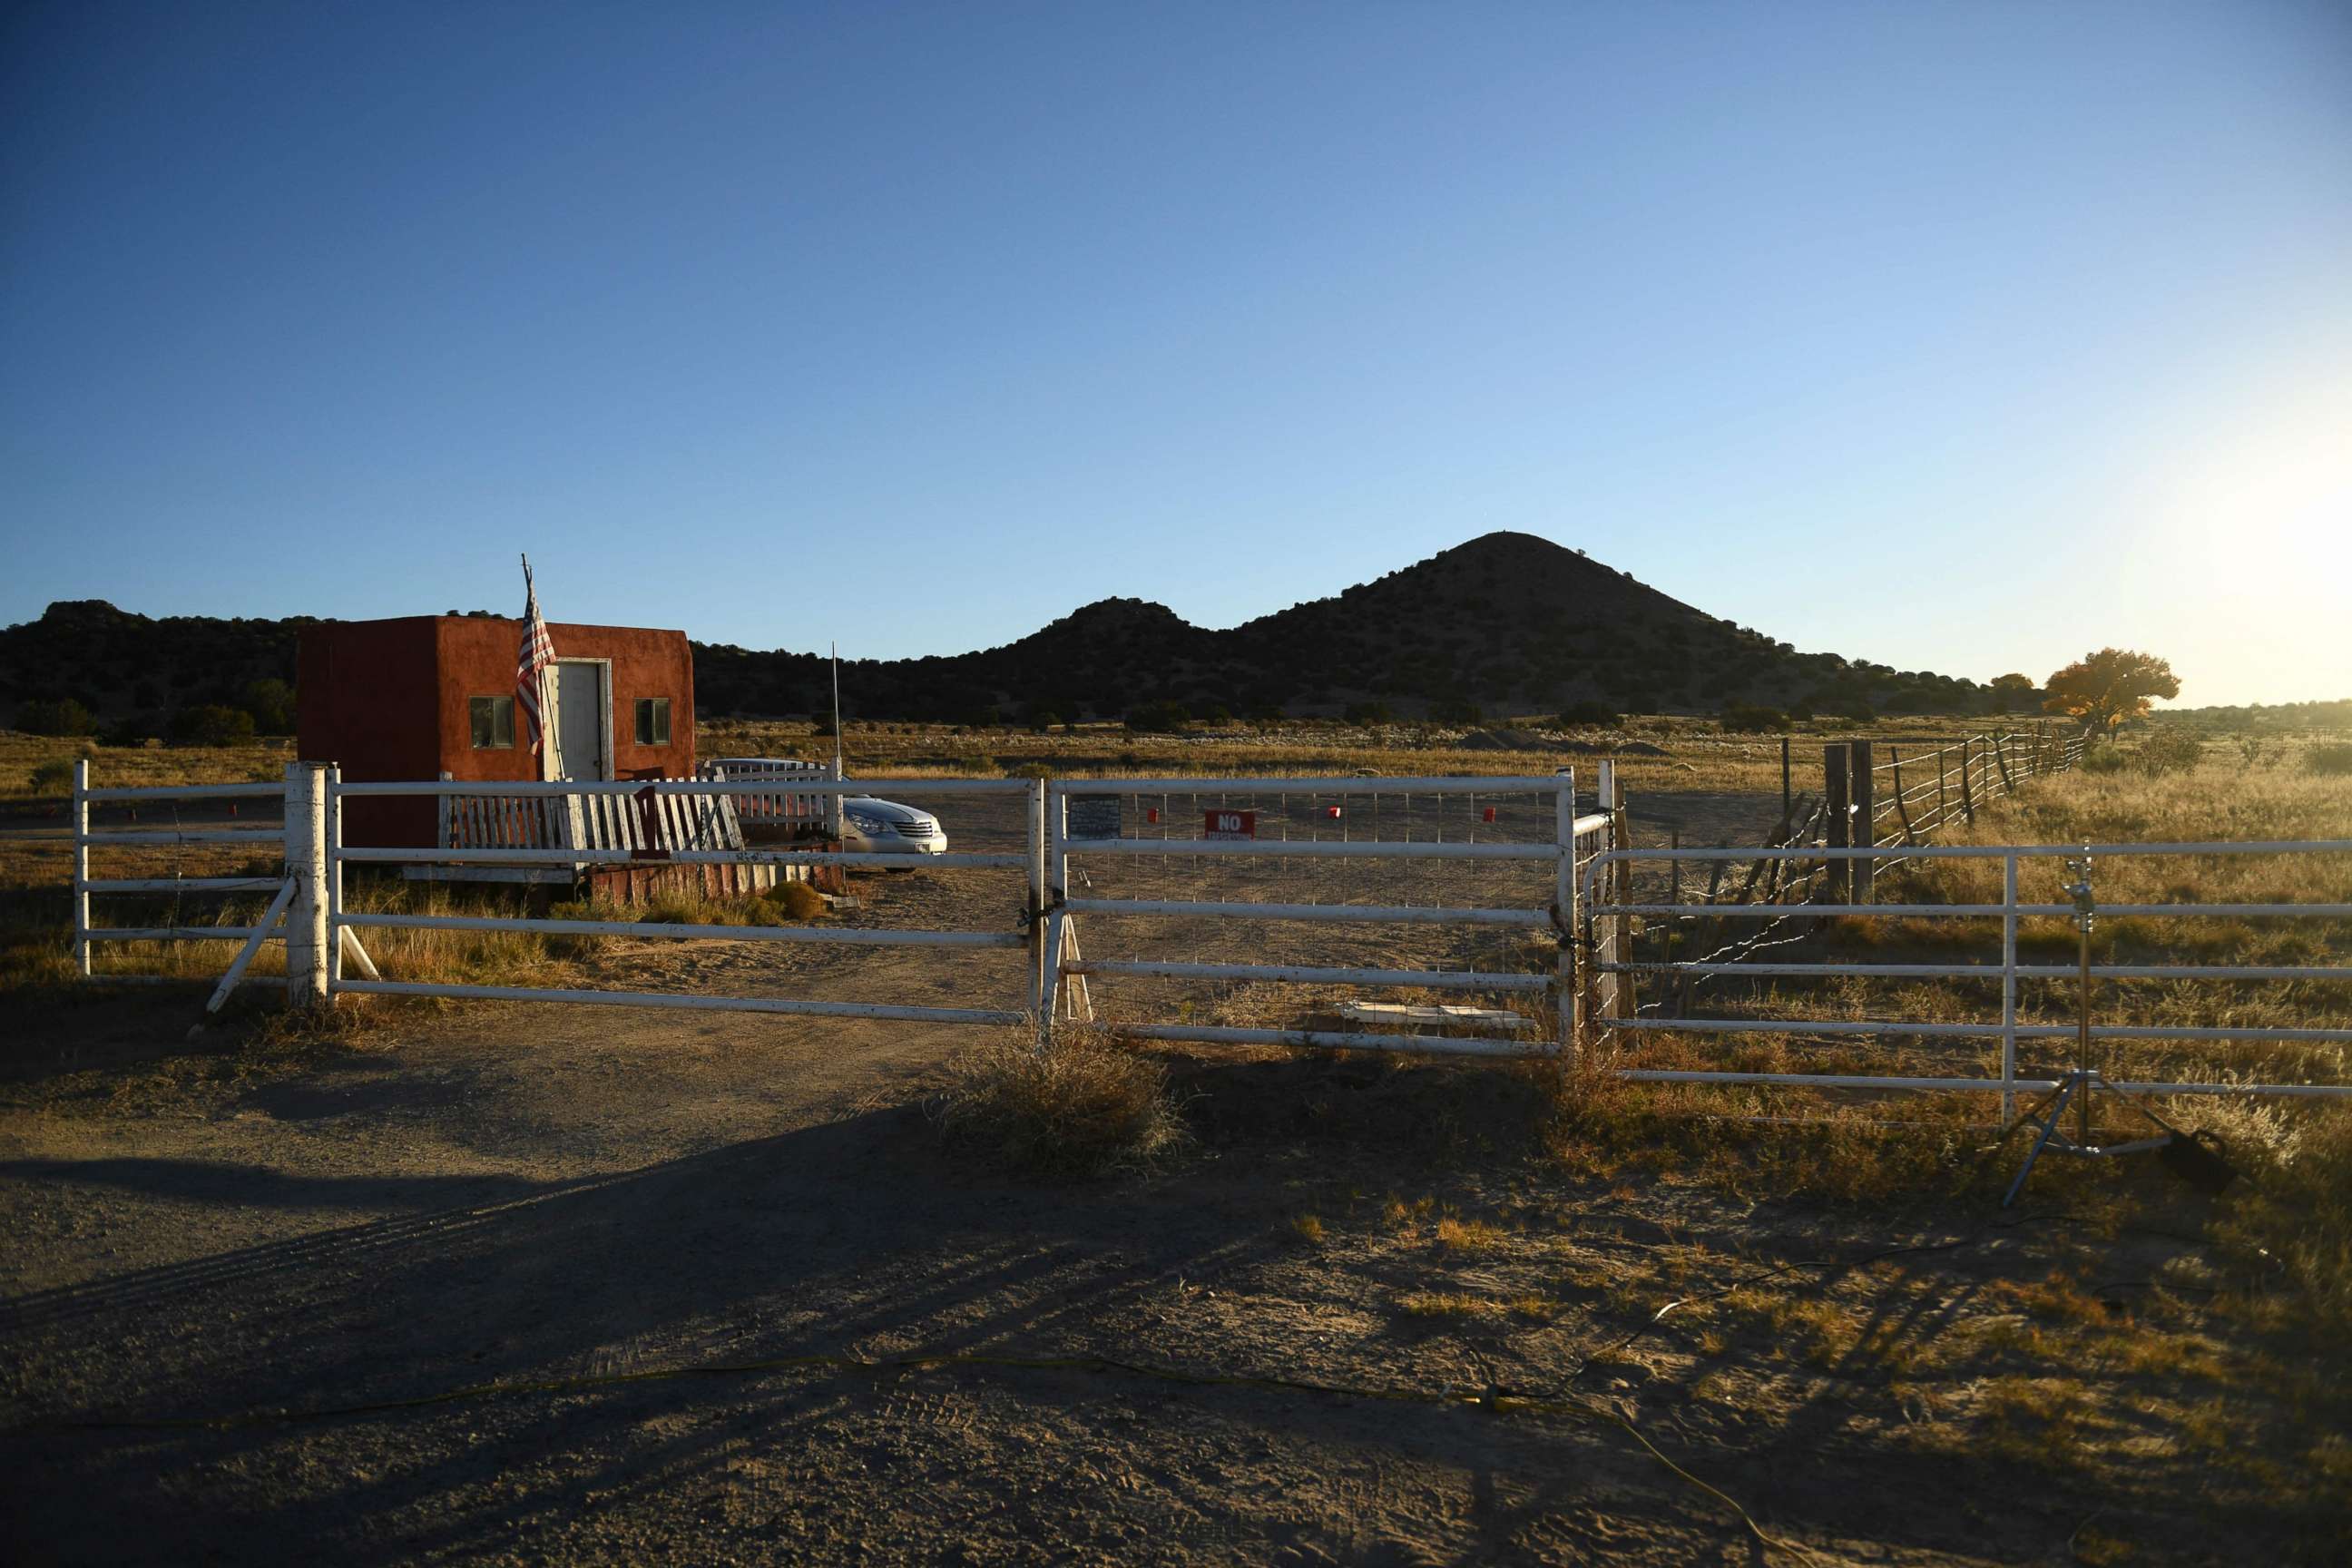 FILE PHOTO: The entrance to the Bonanza Creek Ranch where the movie "Rust" was filming near Santa Fe, New Mexico, is seen in this file photo taken on Oct. 29, 2021.